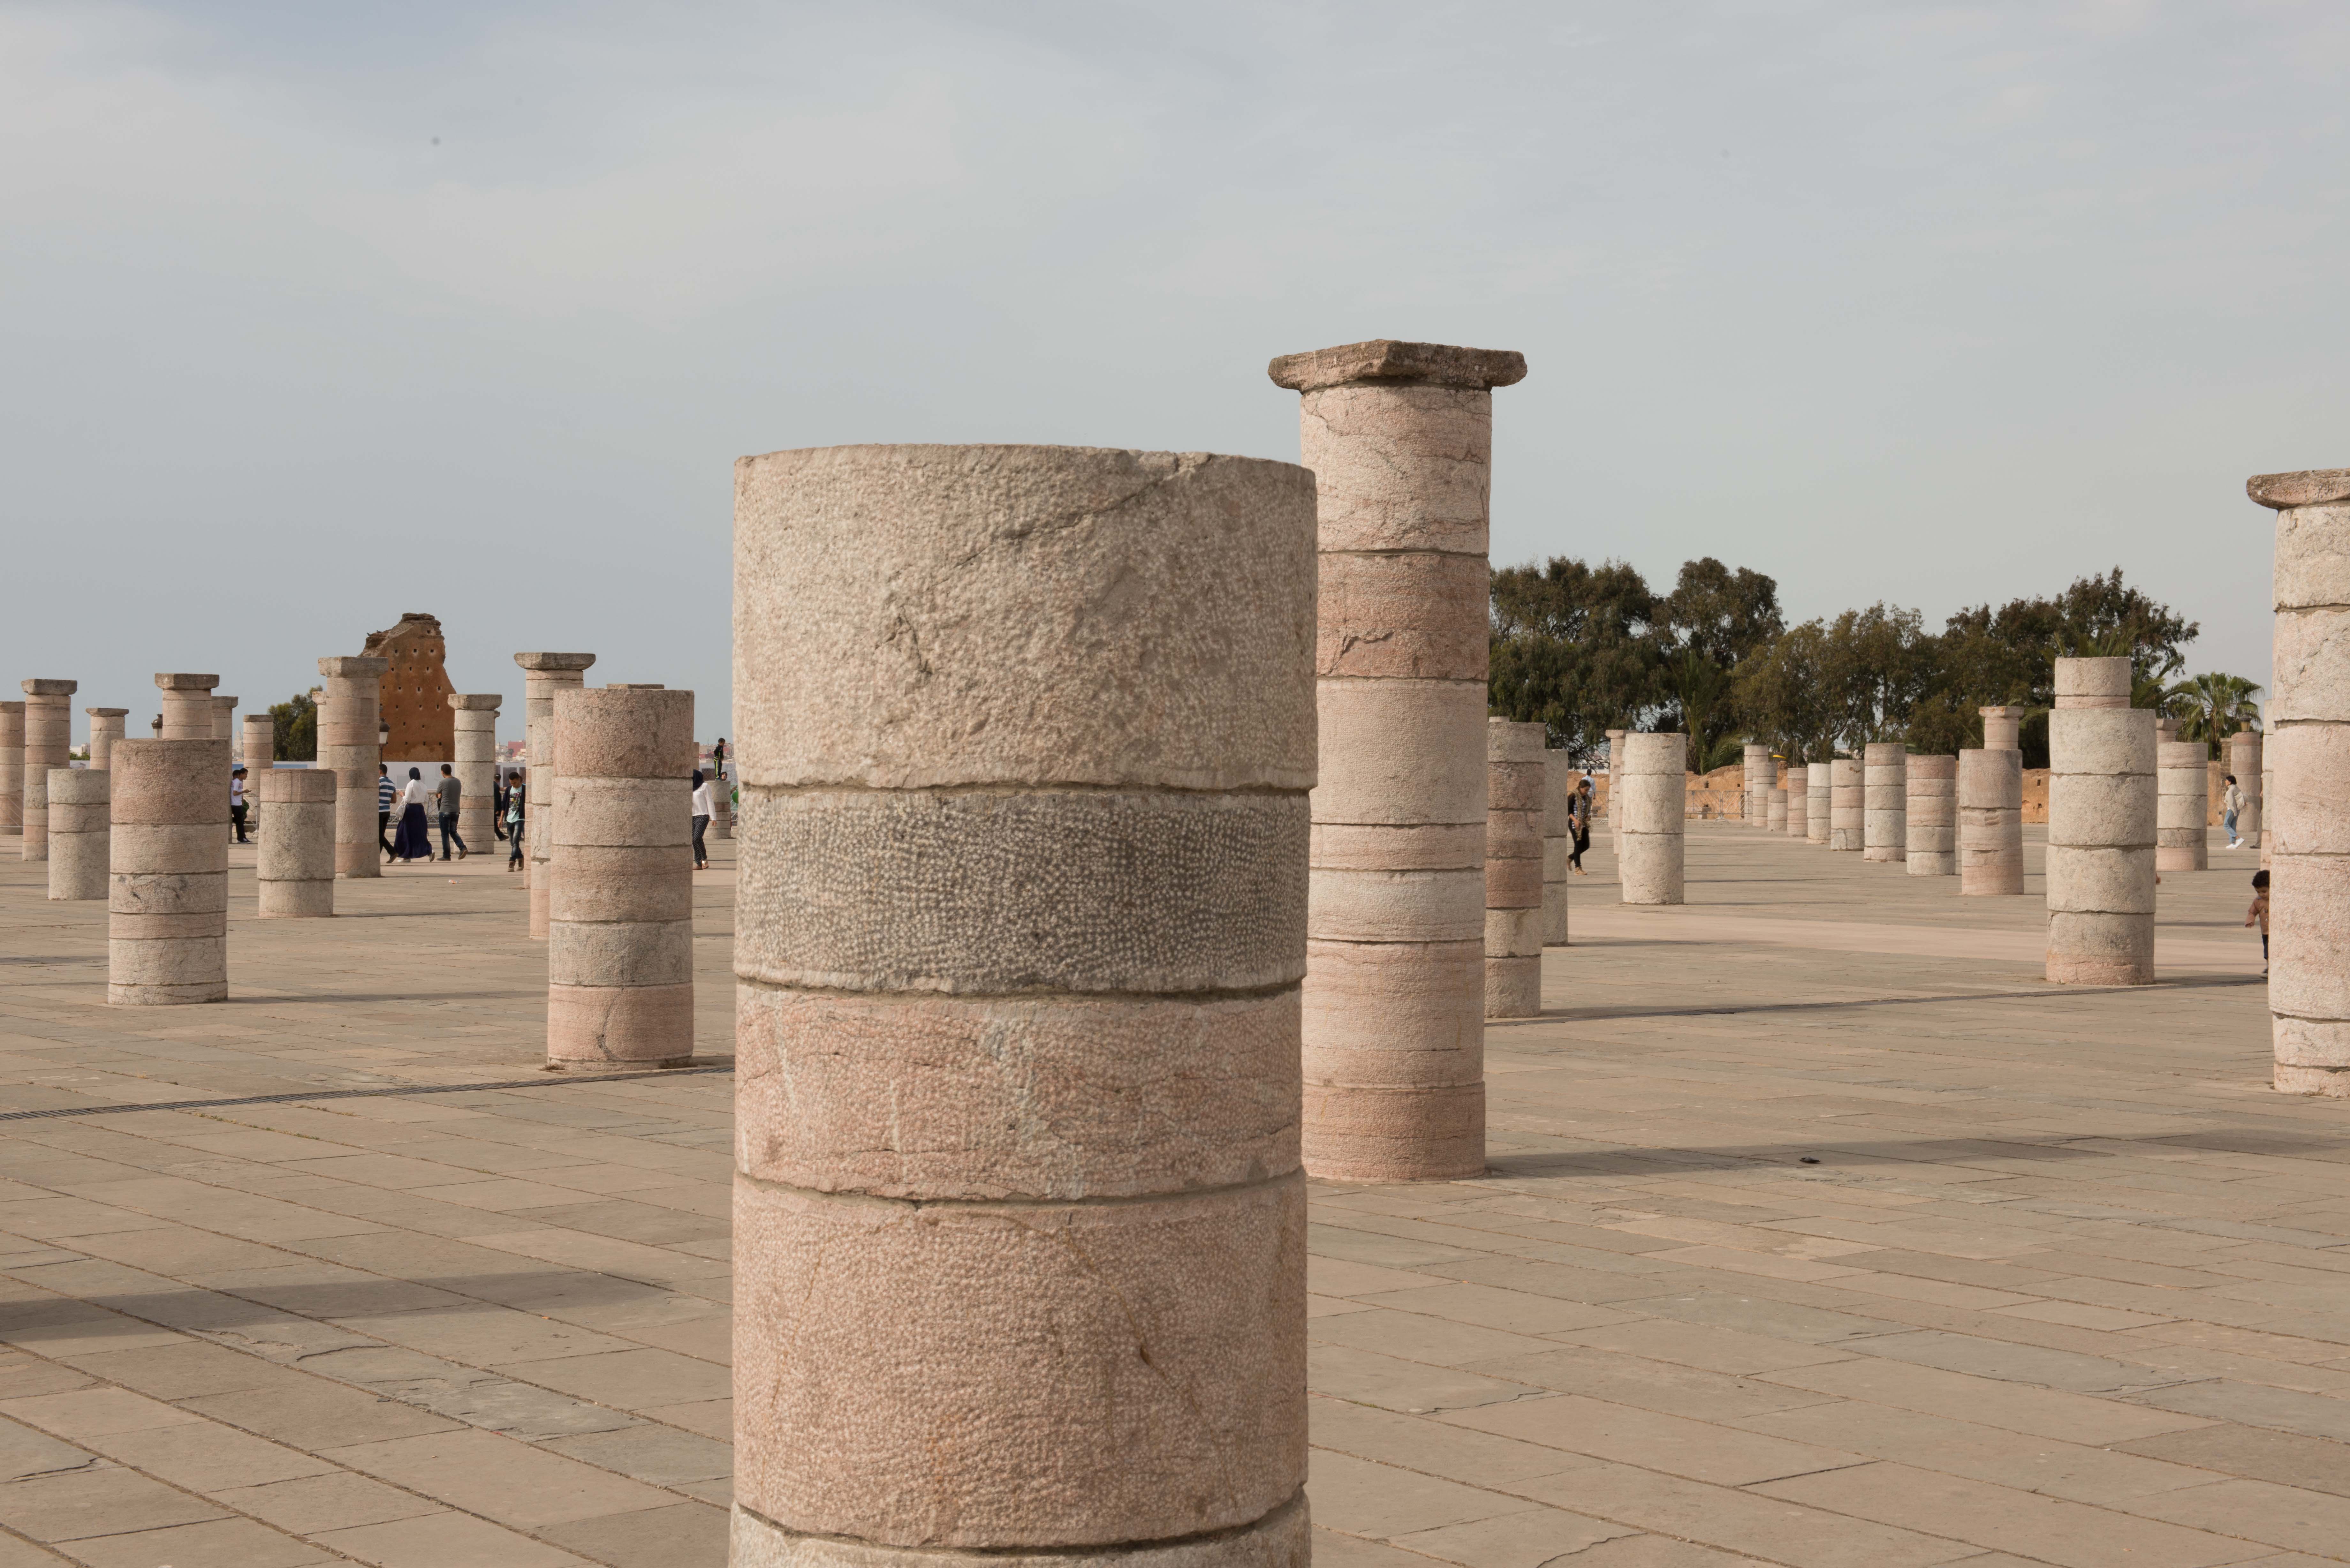 Remains of pillars of the mosque at the Tour Hassan